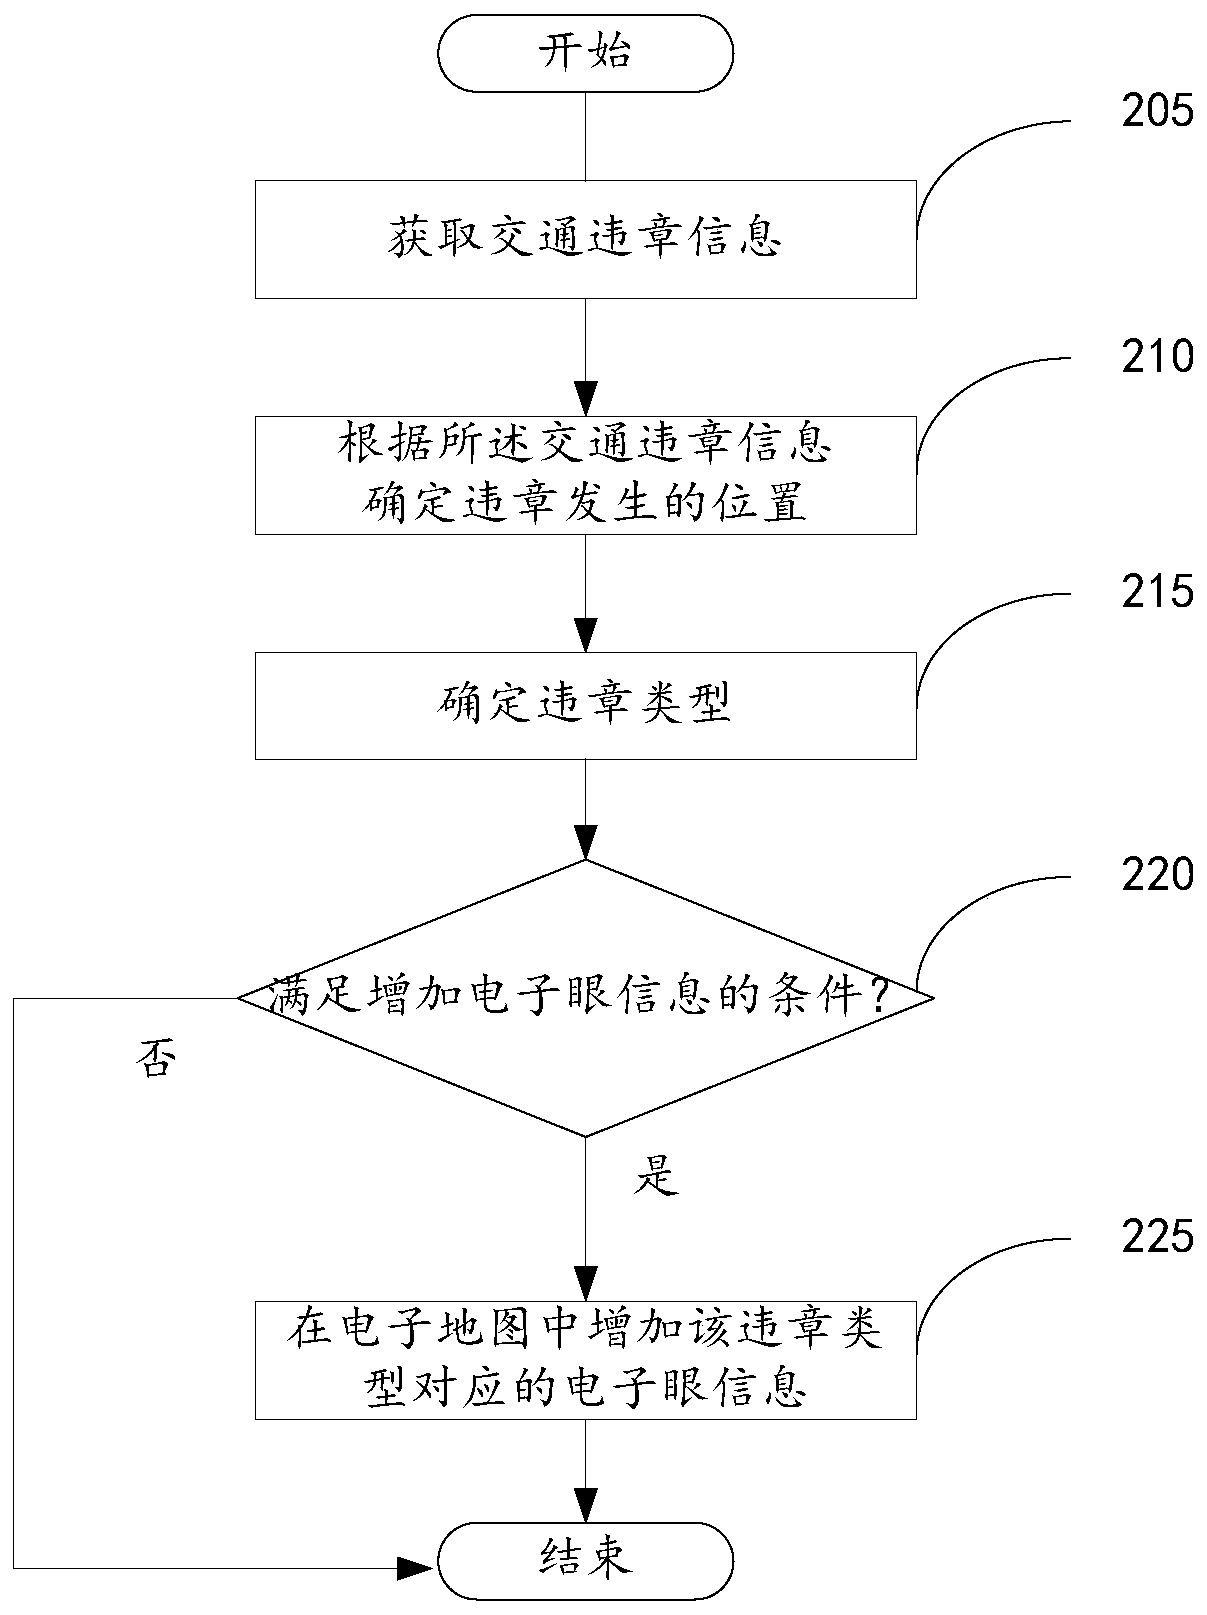 A method and device for increasing electronic eye information, navigation chip and server